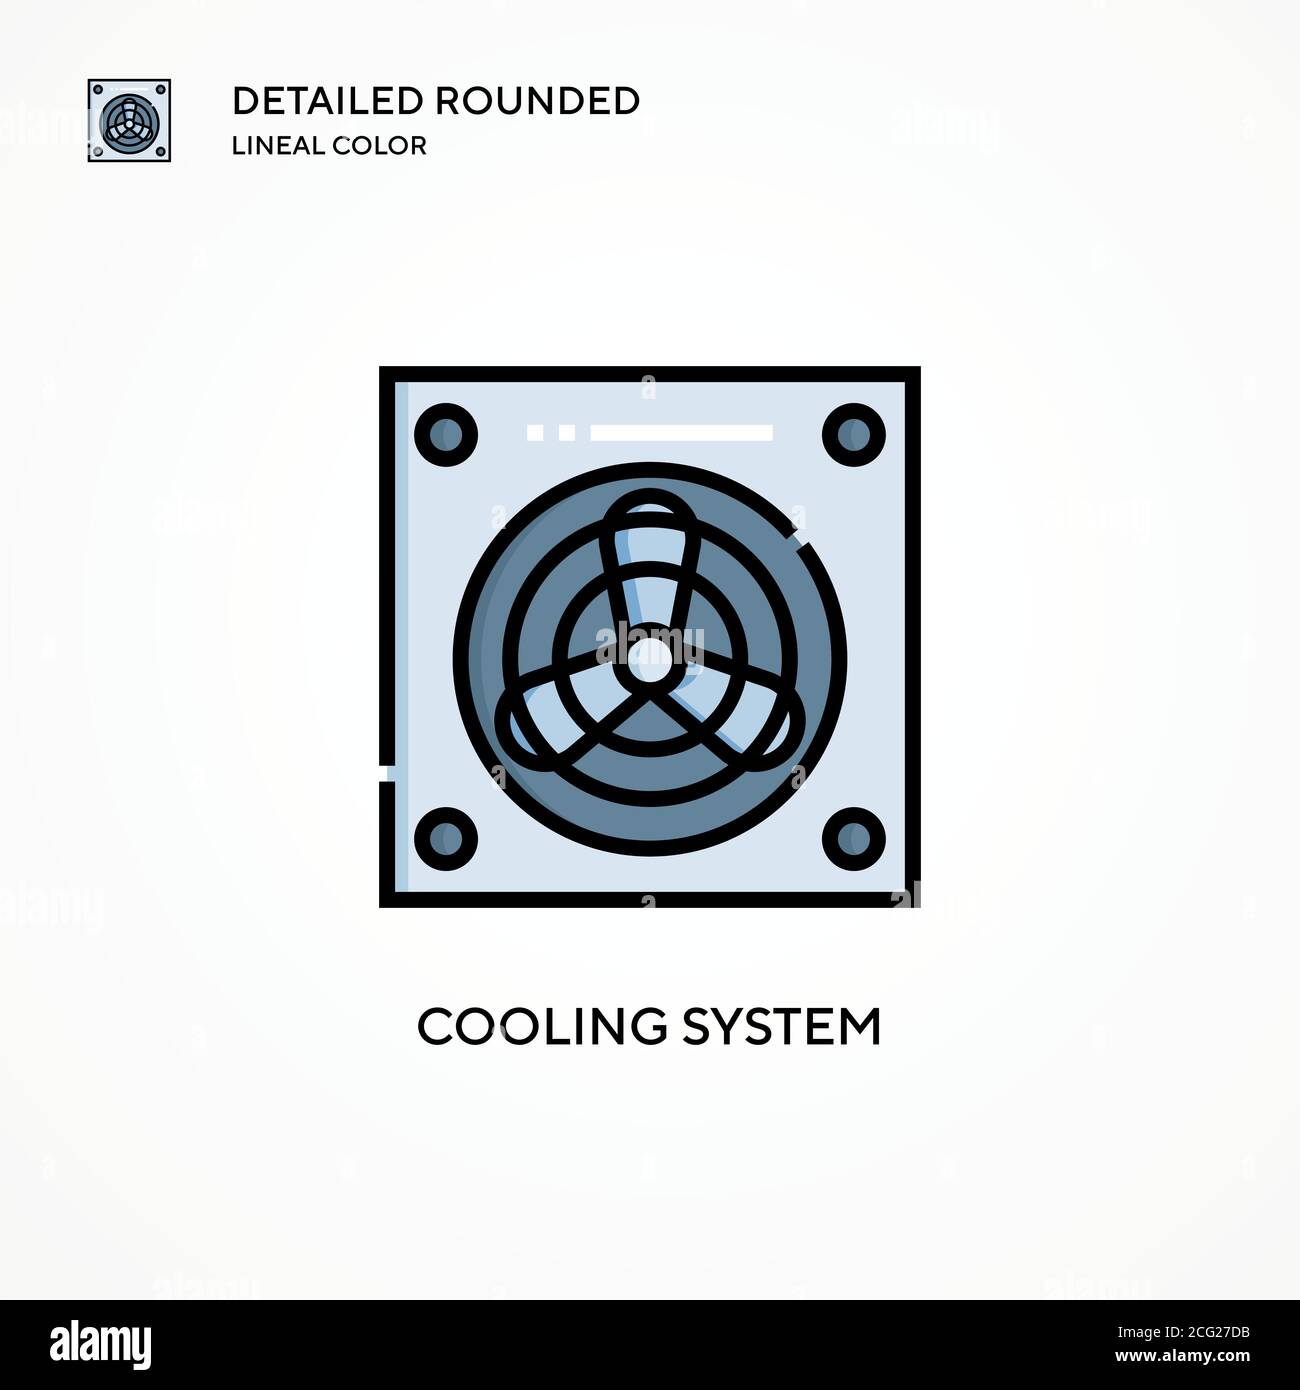 Cooling system vector icon. Modern vector illustration concepts. Easy to edit and customize. Stock Vector